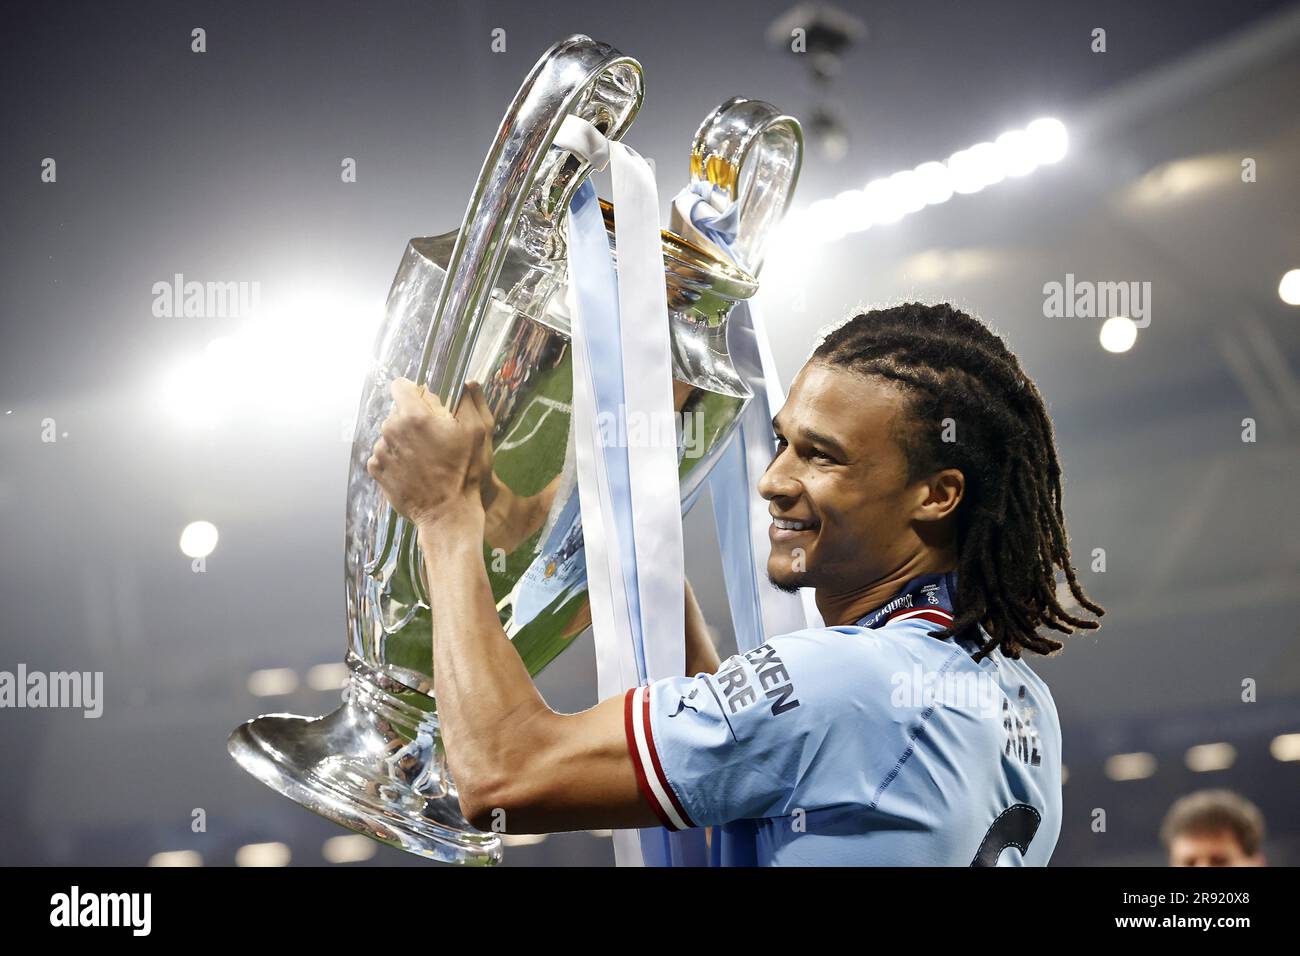 ISTANBUL - Nathan Ake of Manchester City FC with UEFA Champions